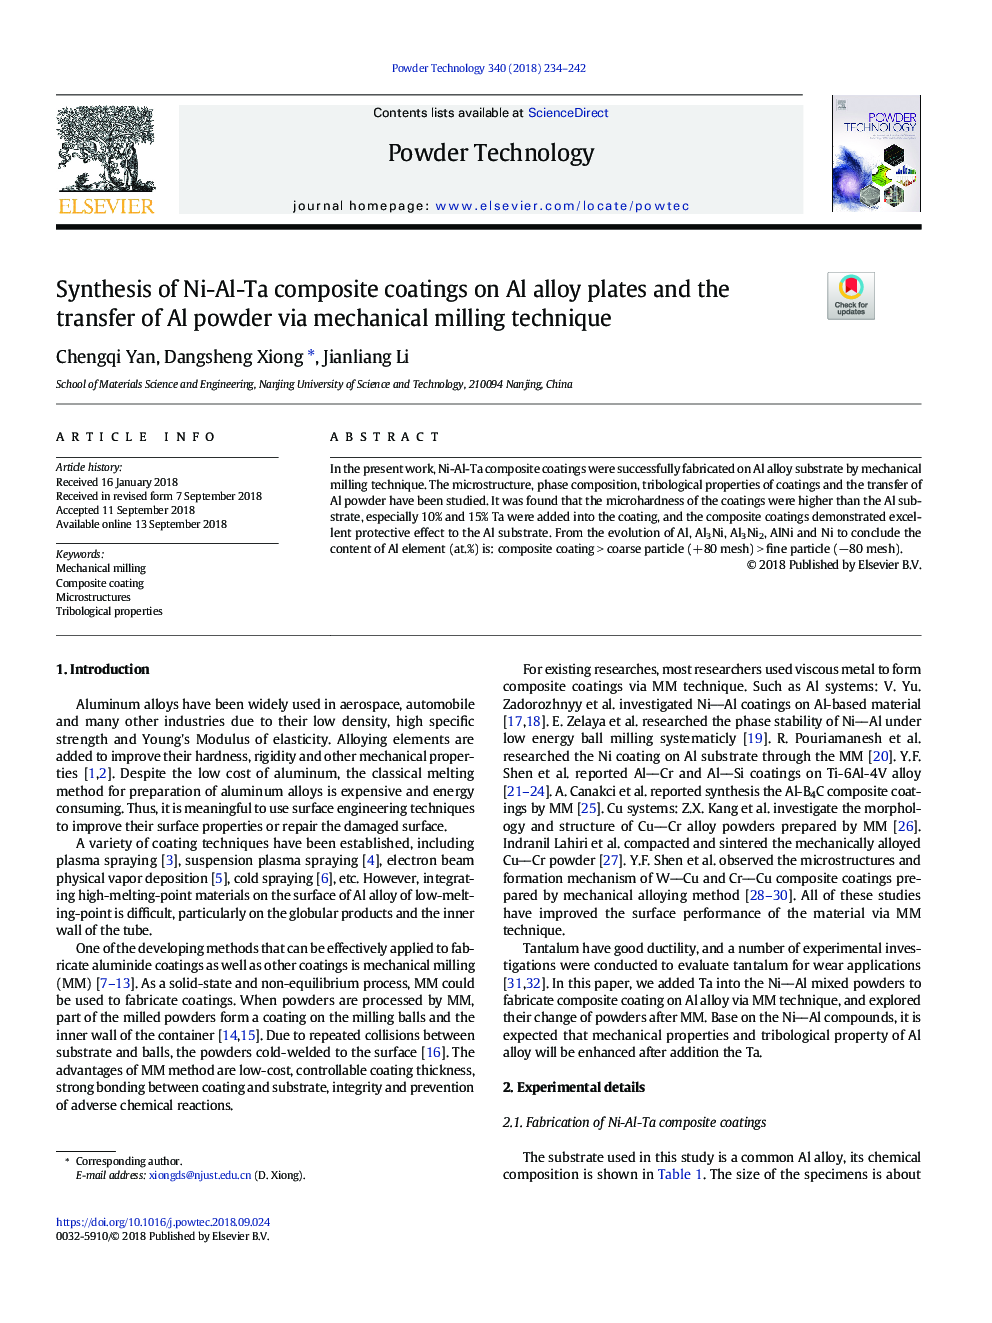 Synthesis of Ni-Al-Ta composite coatings on Al alloy plates and the transfer of Al powder via mechanical milling technique